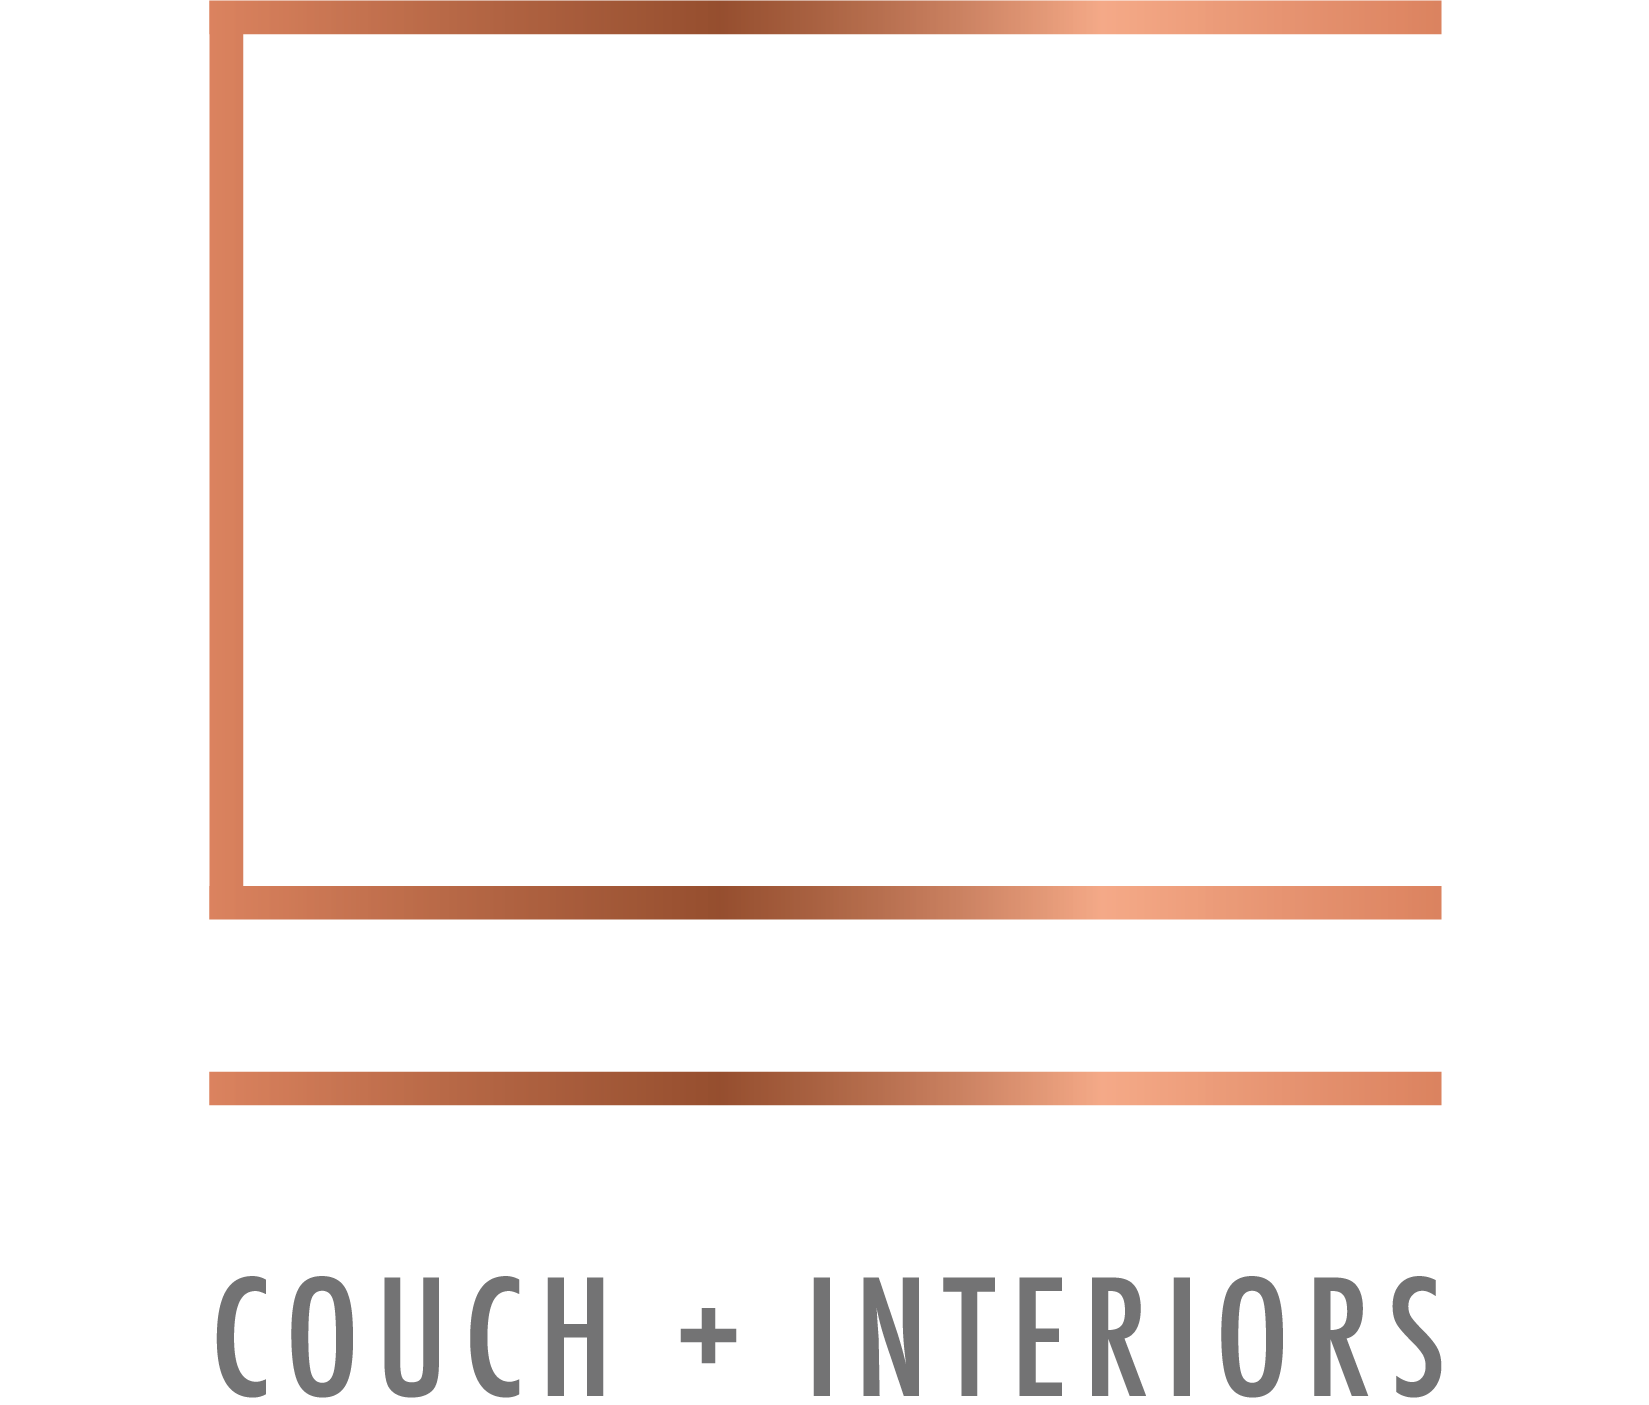 Couch + Interiors